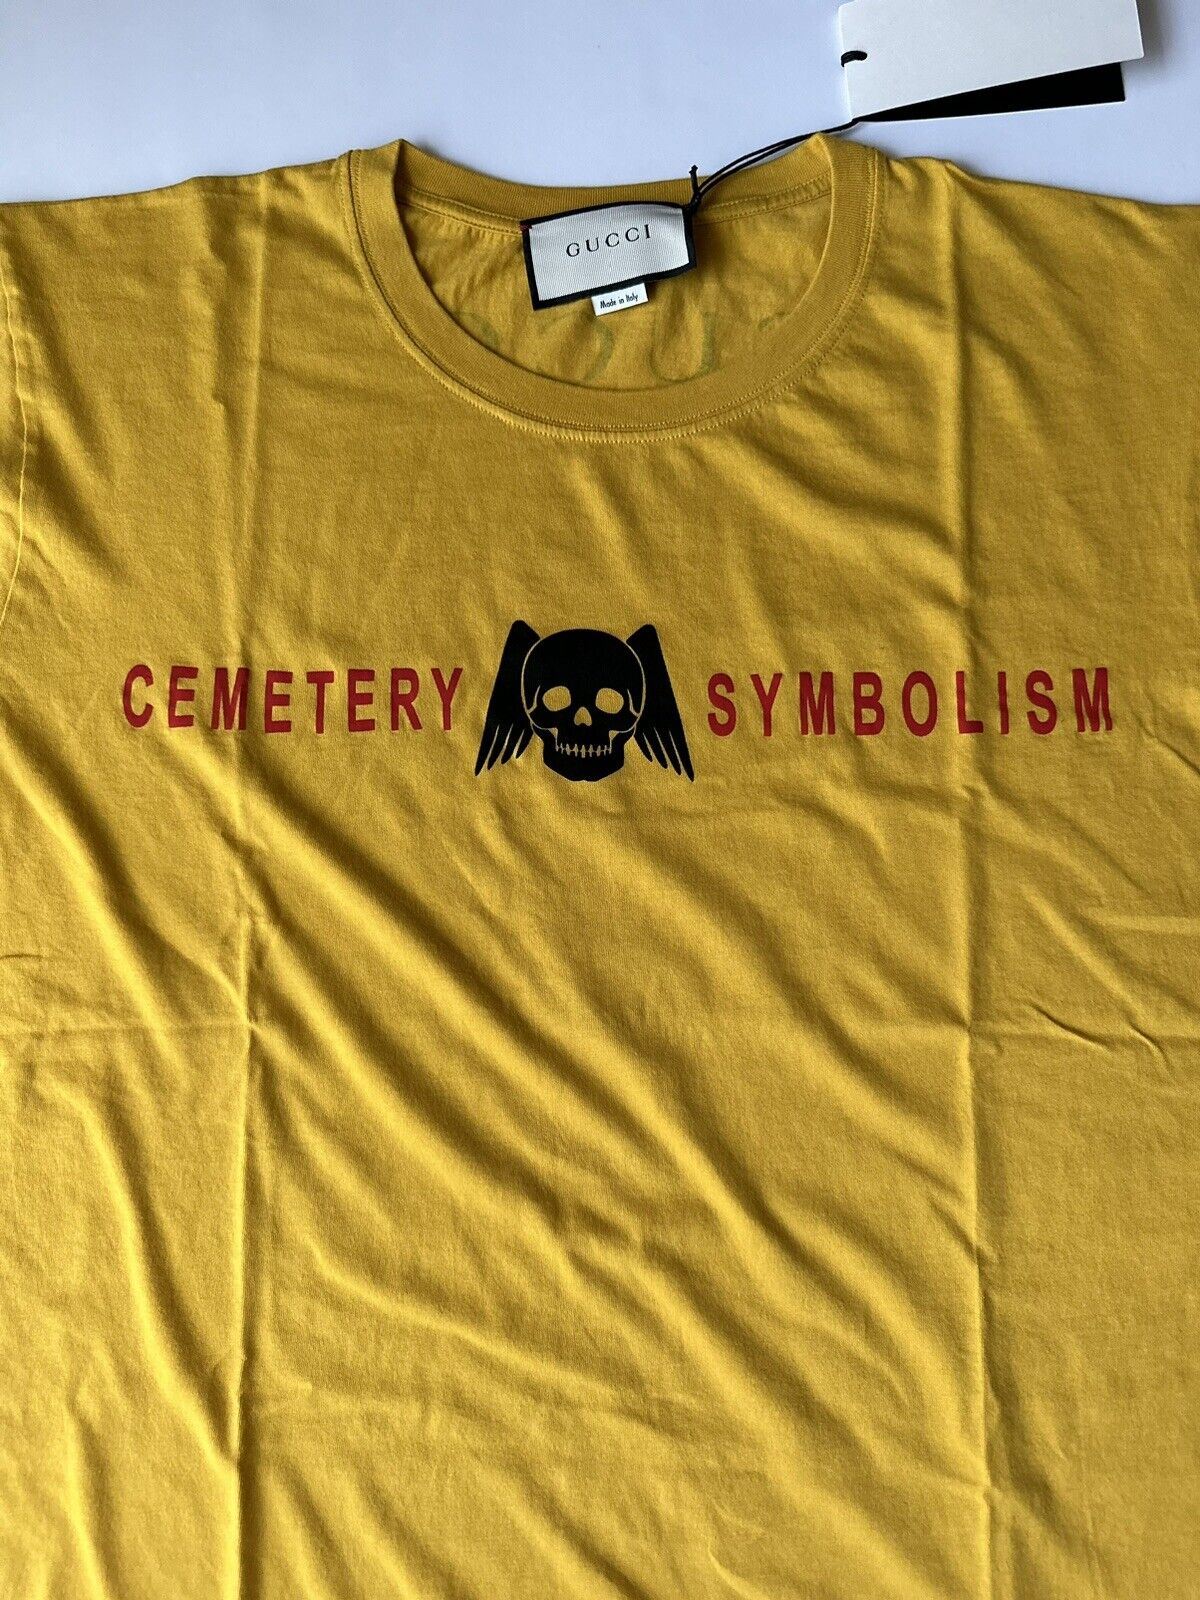 NWT Gucci Cemetery Symbolism Yellow Cotton Jersey T-Shirt L 493117 Made in Italy